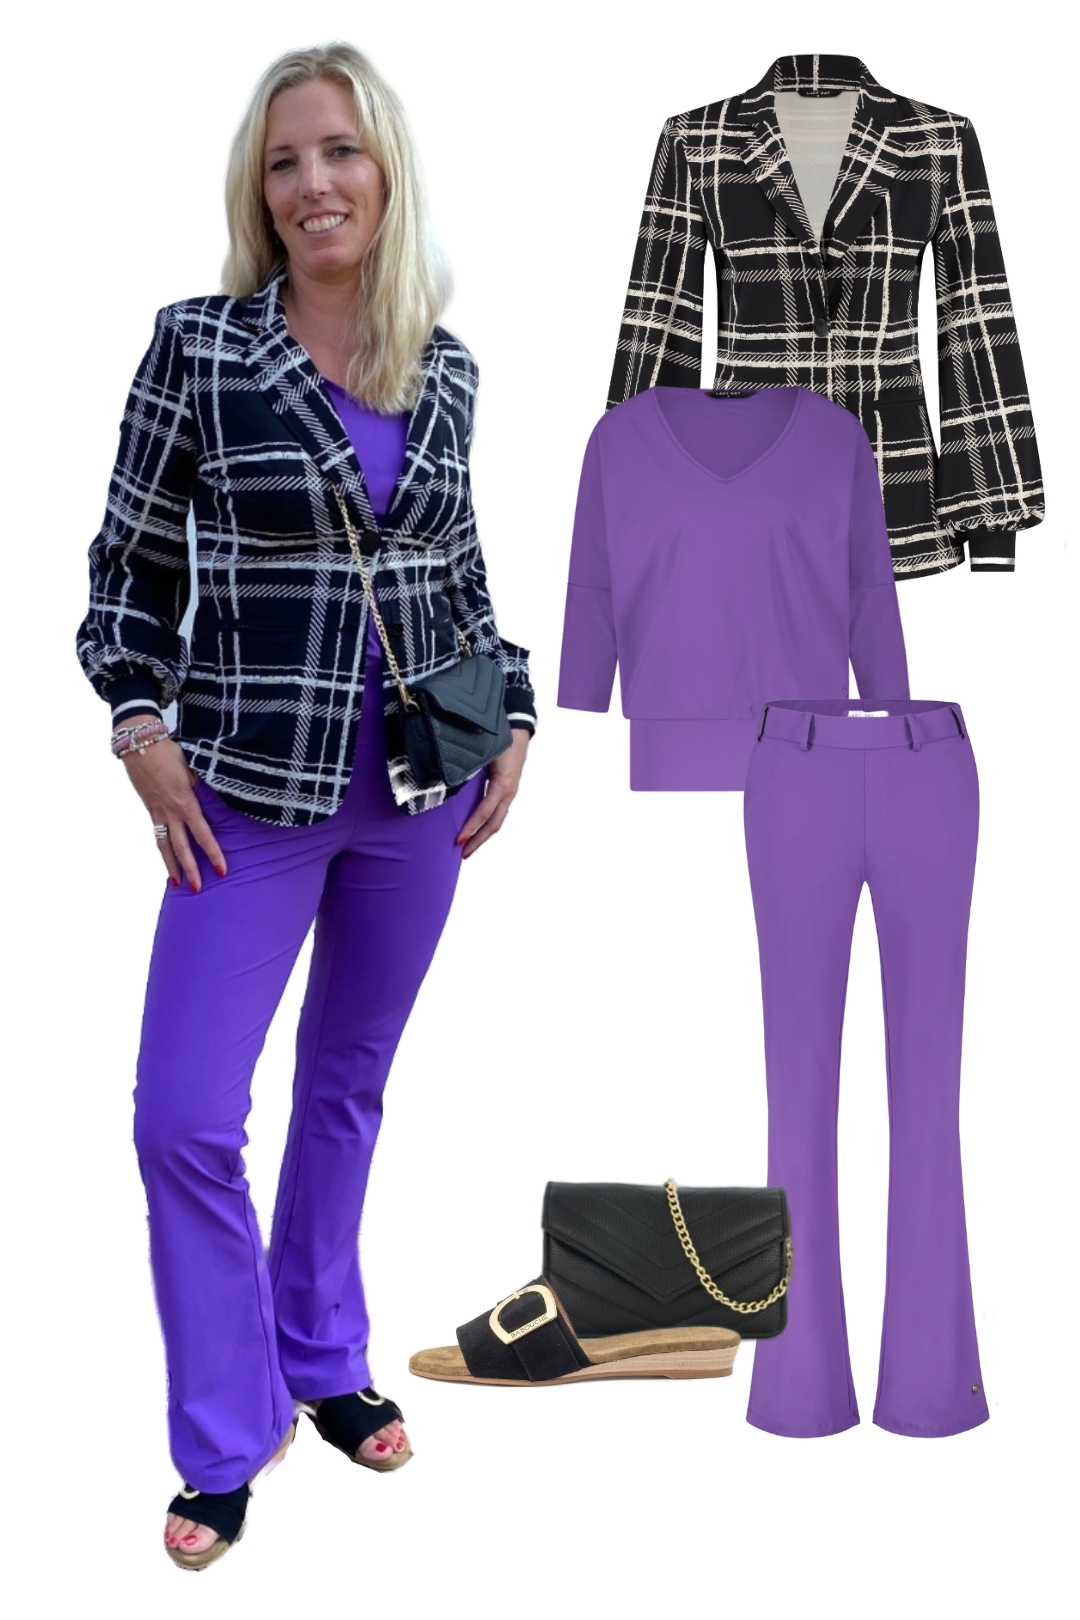 Shop the look Lady Day